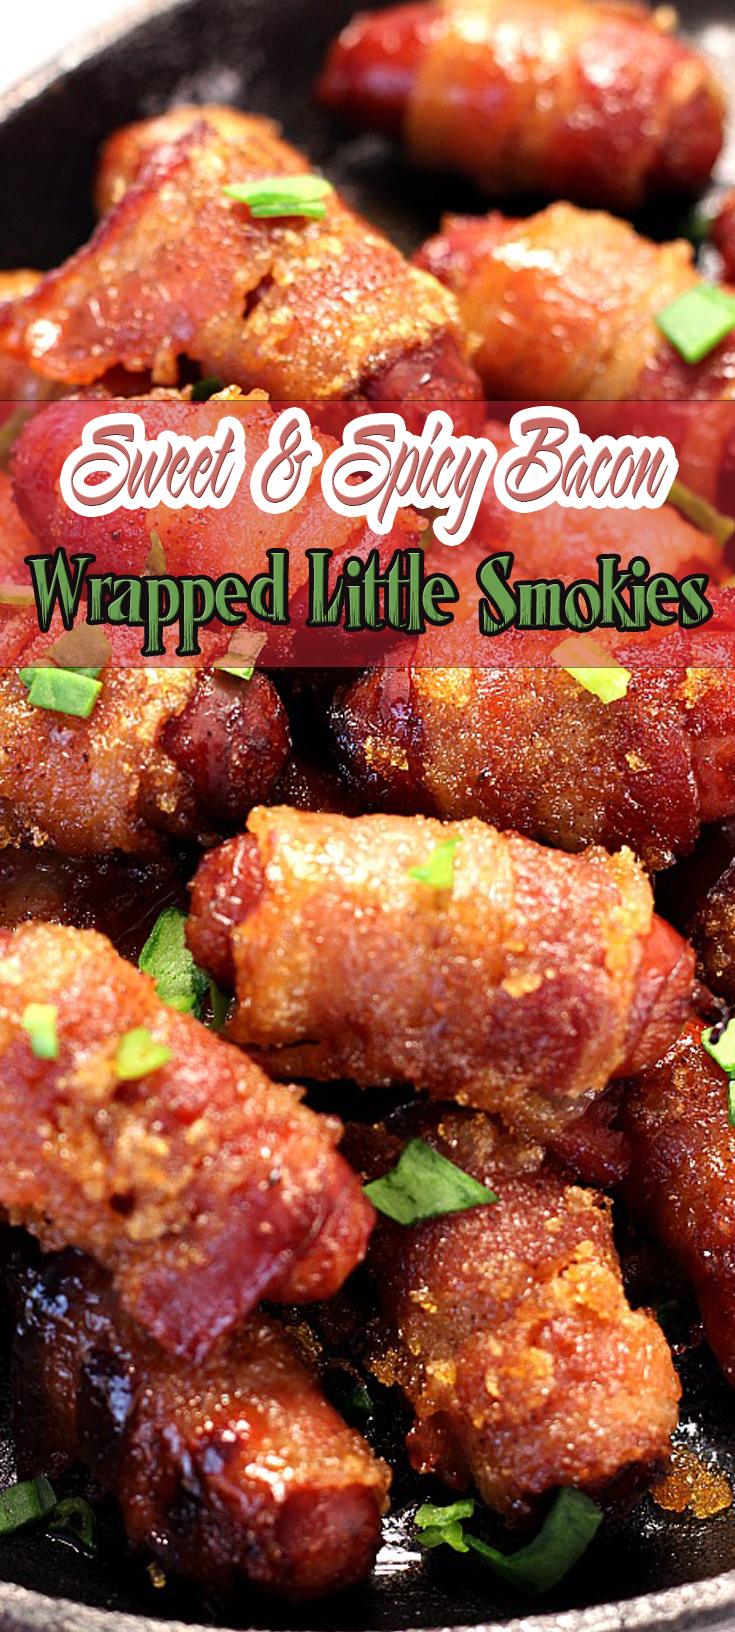 Sweet and Spicy Bacon Wrapped Little Smokies